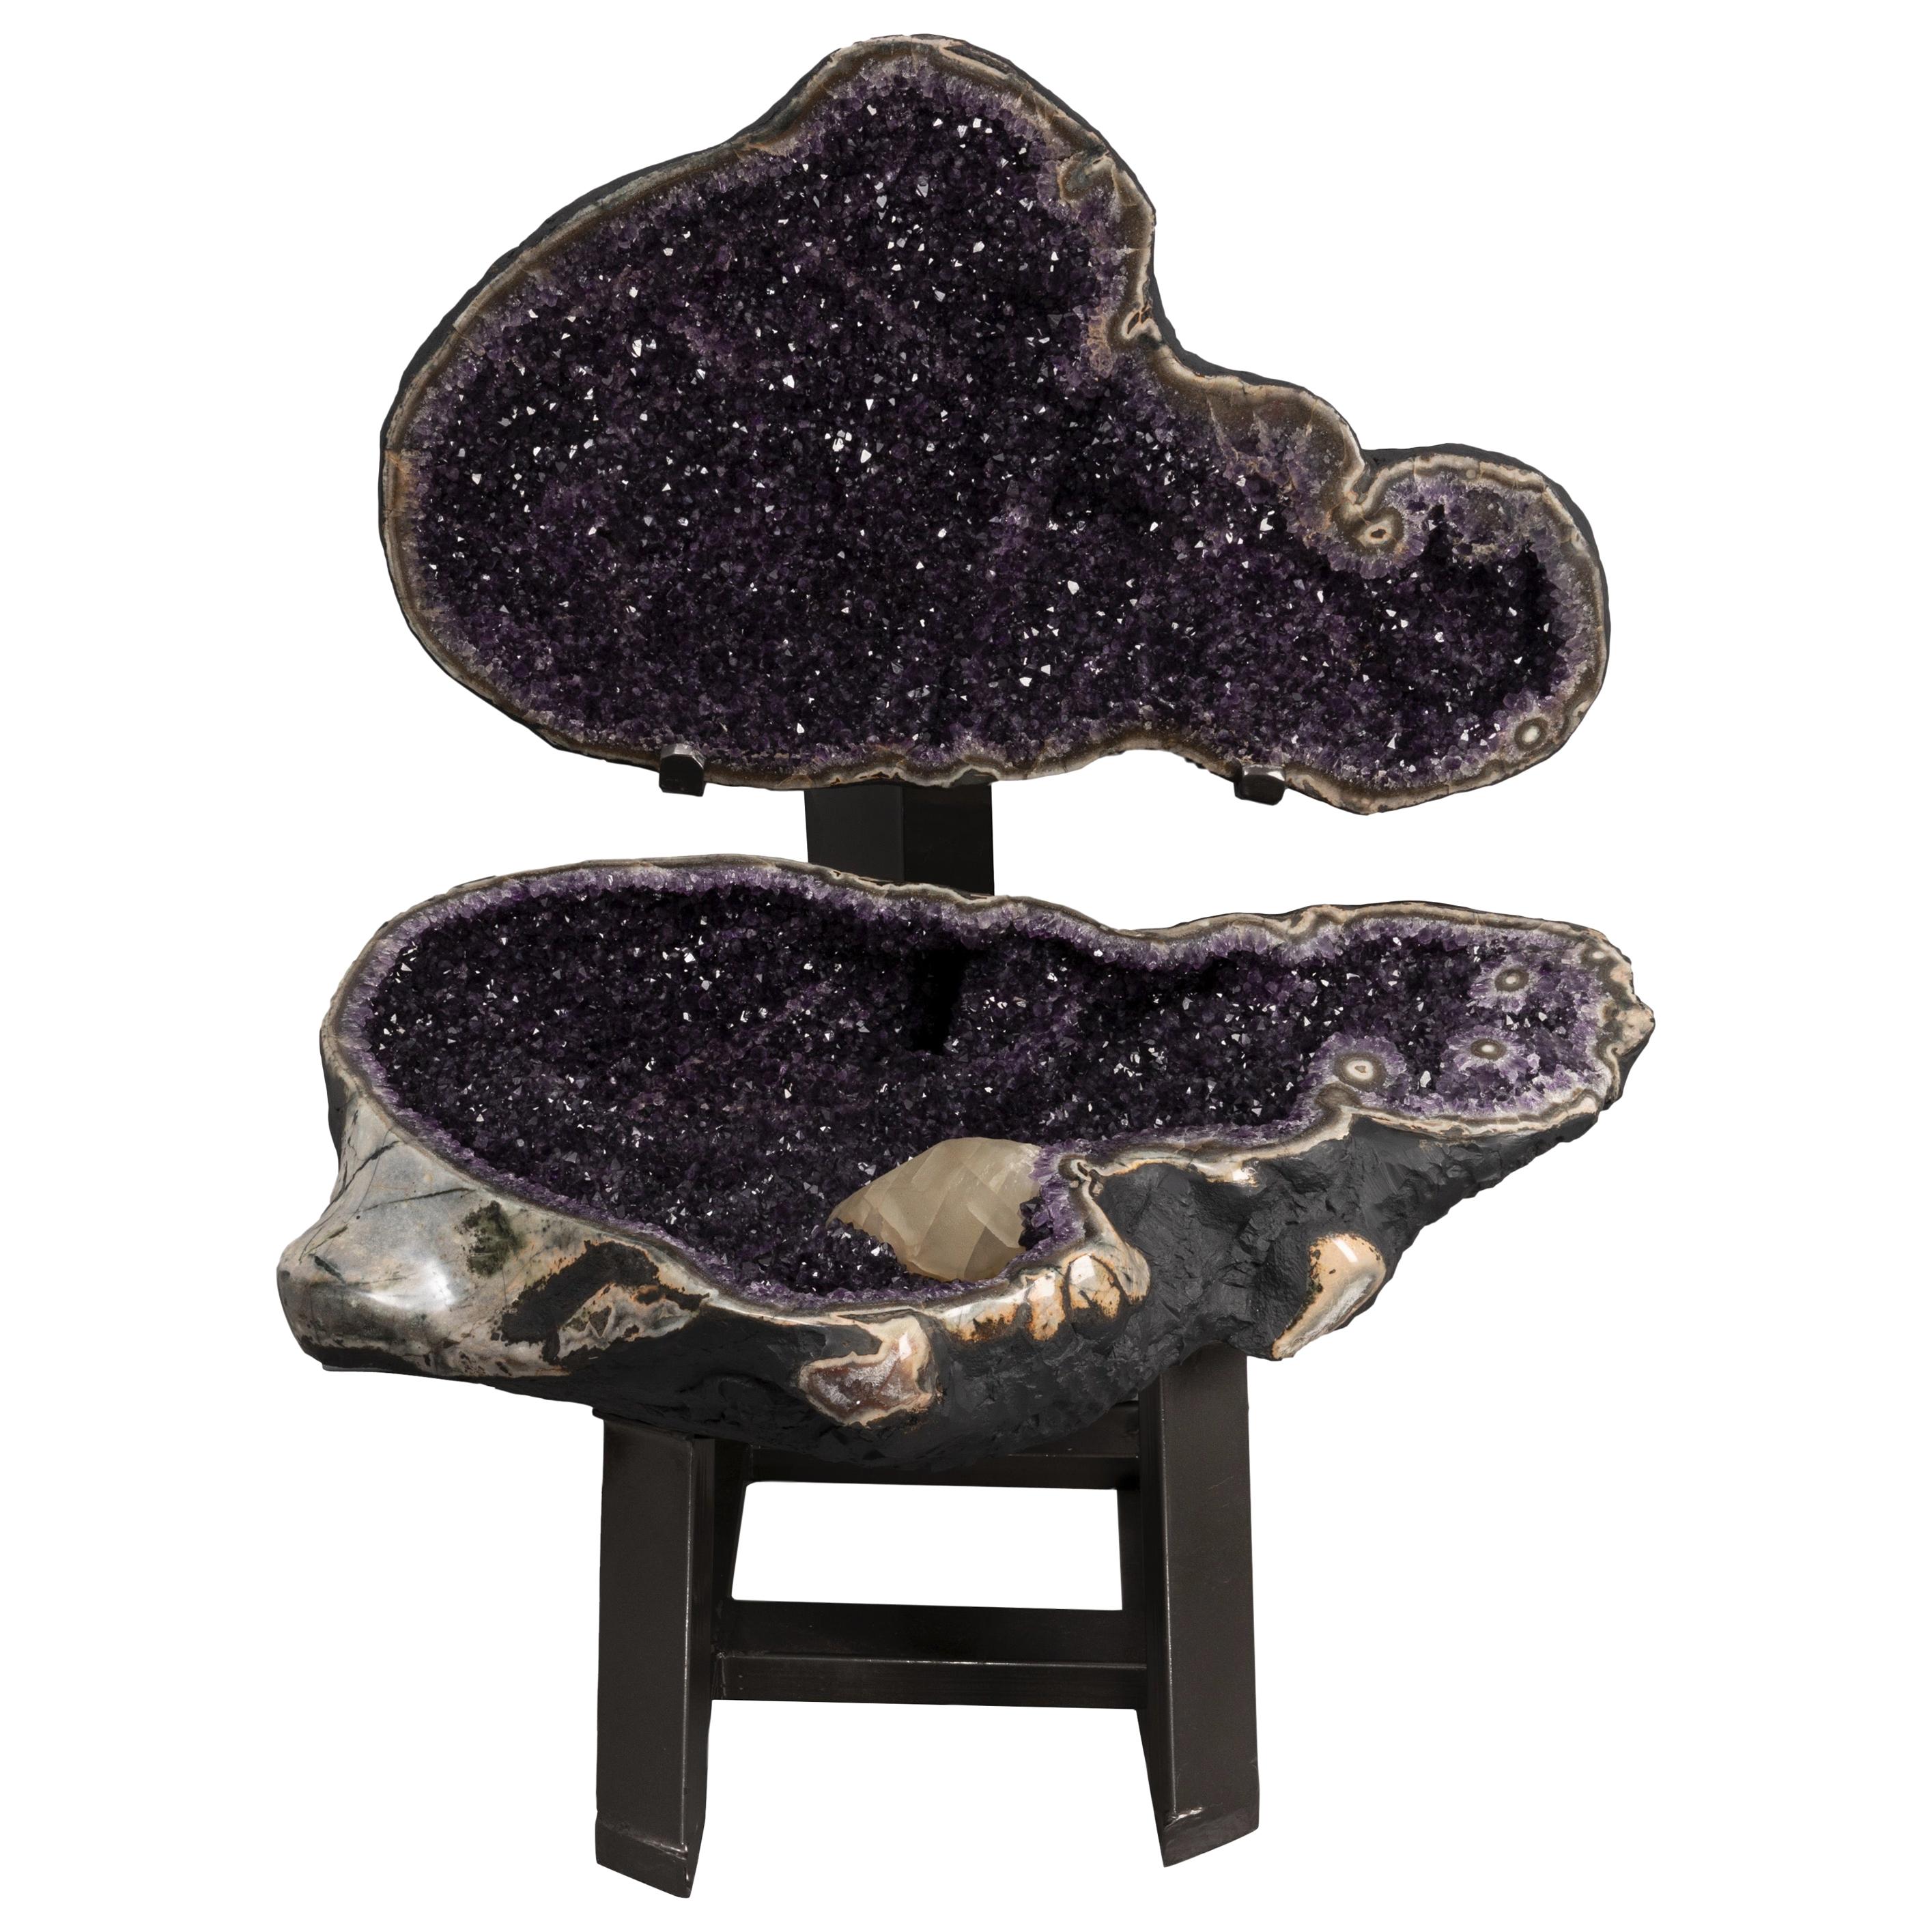 Very Large Polished Amethyst “Open Geode” with Calcite Formation and Agate